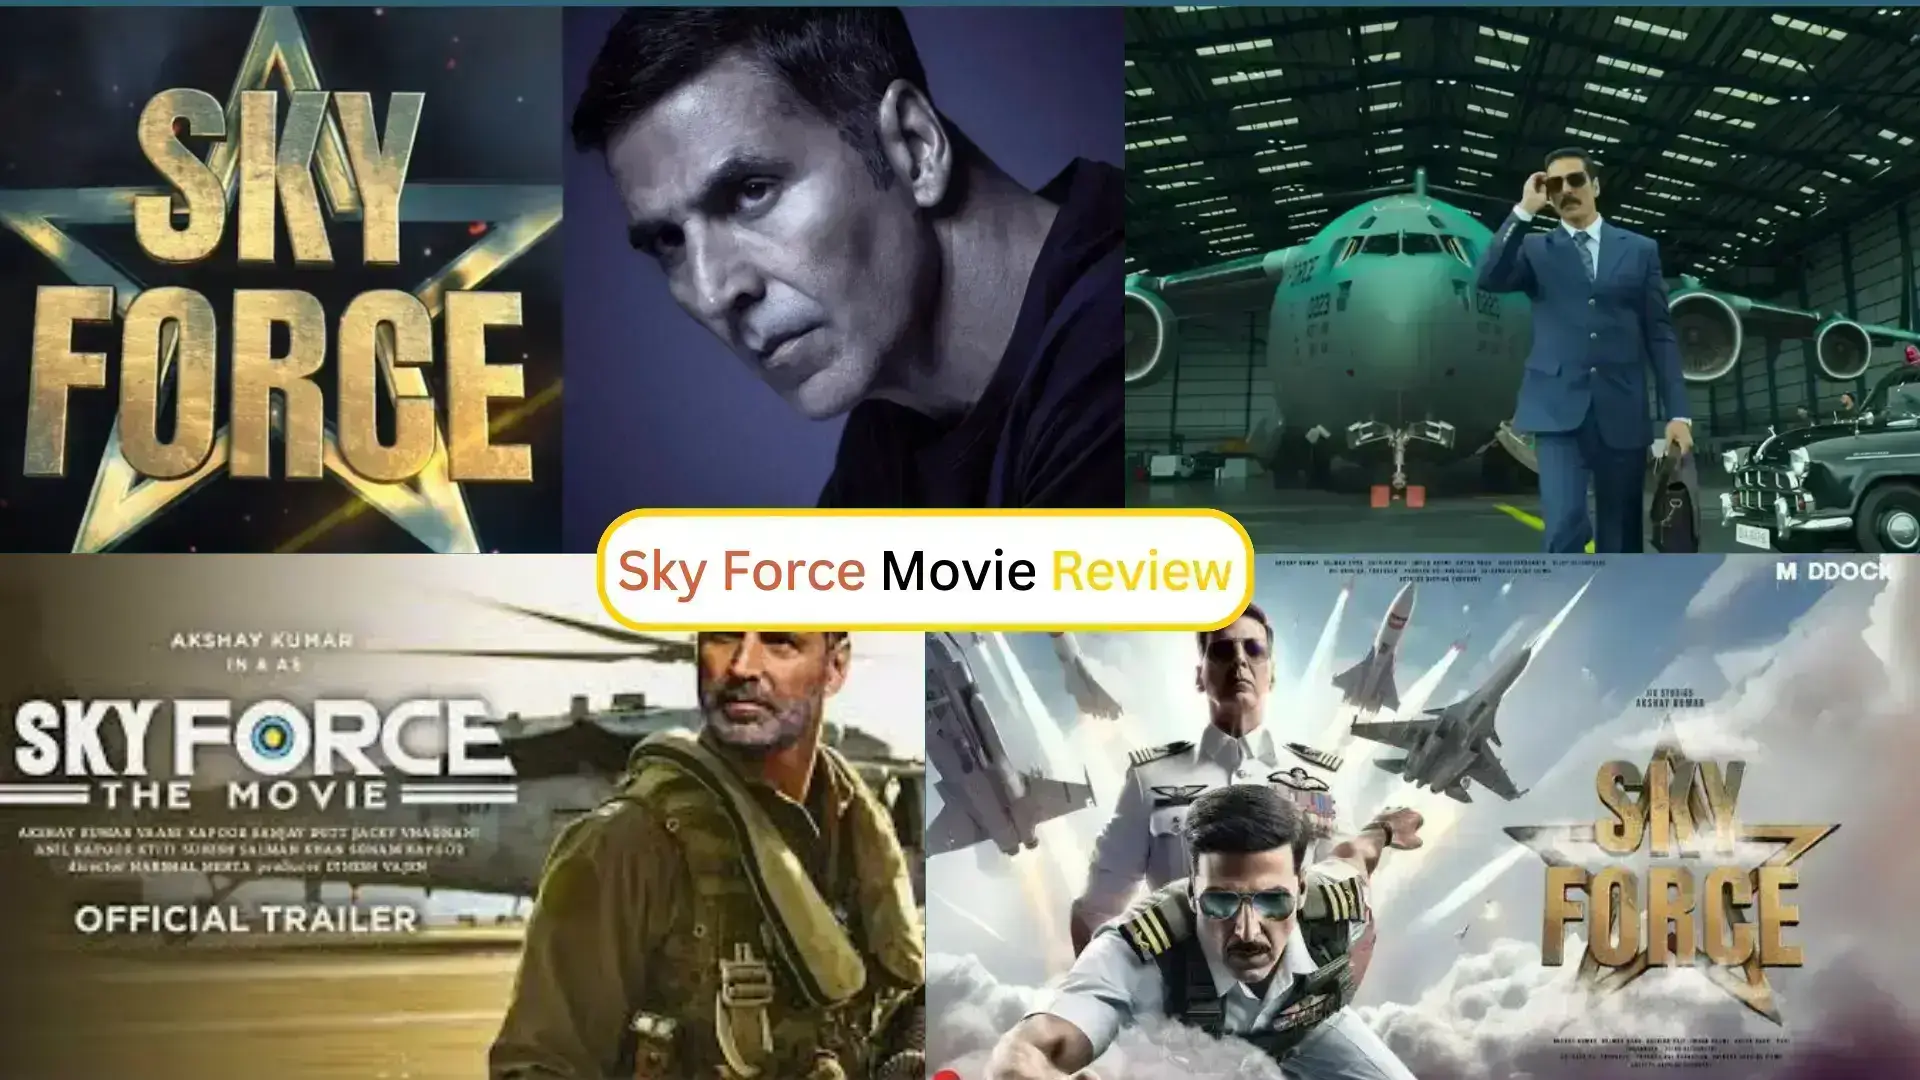 Sky Force Movie Review(2024)| This movie tells a true story about the Indian Air Force and their remarkable victories. The actor plays the role of an Air Force Officer.